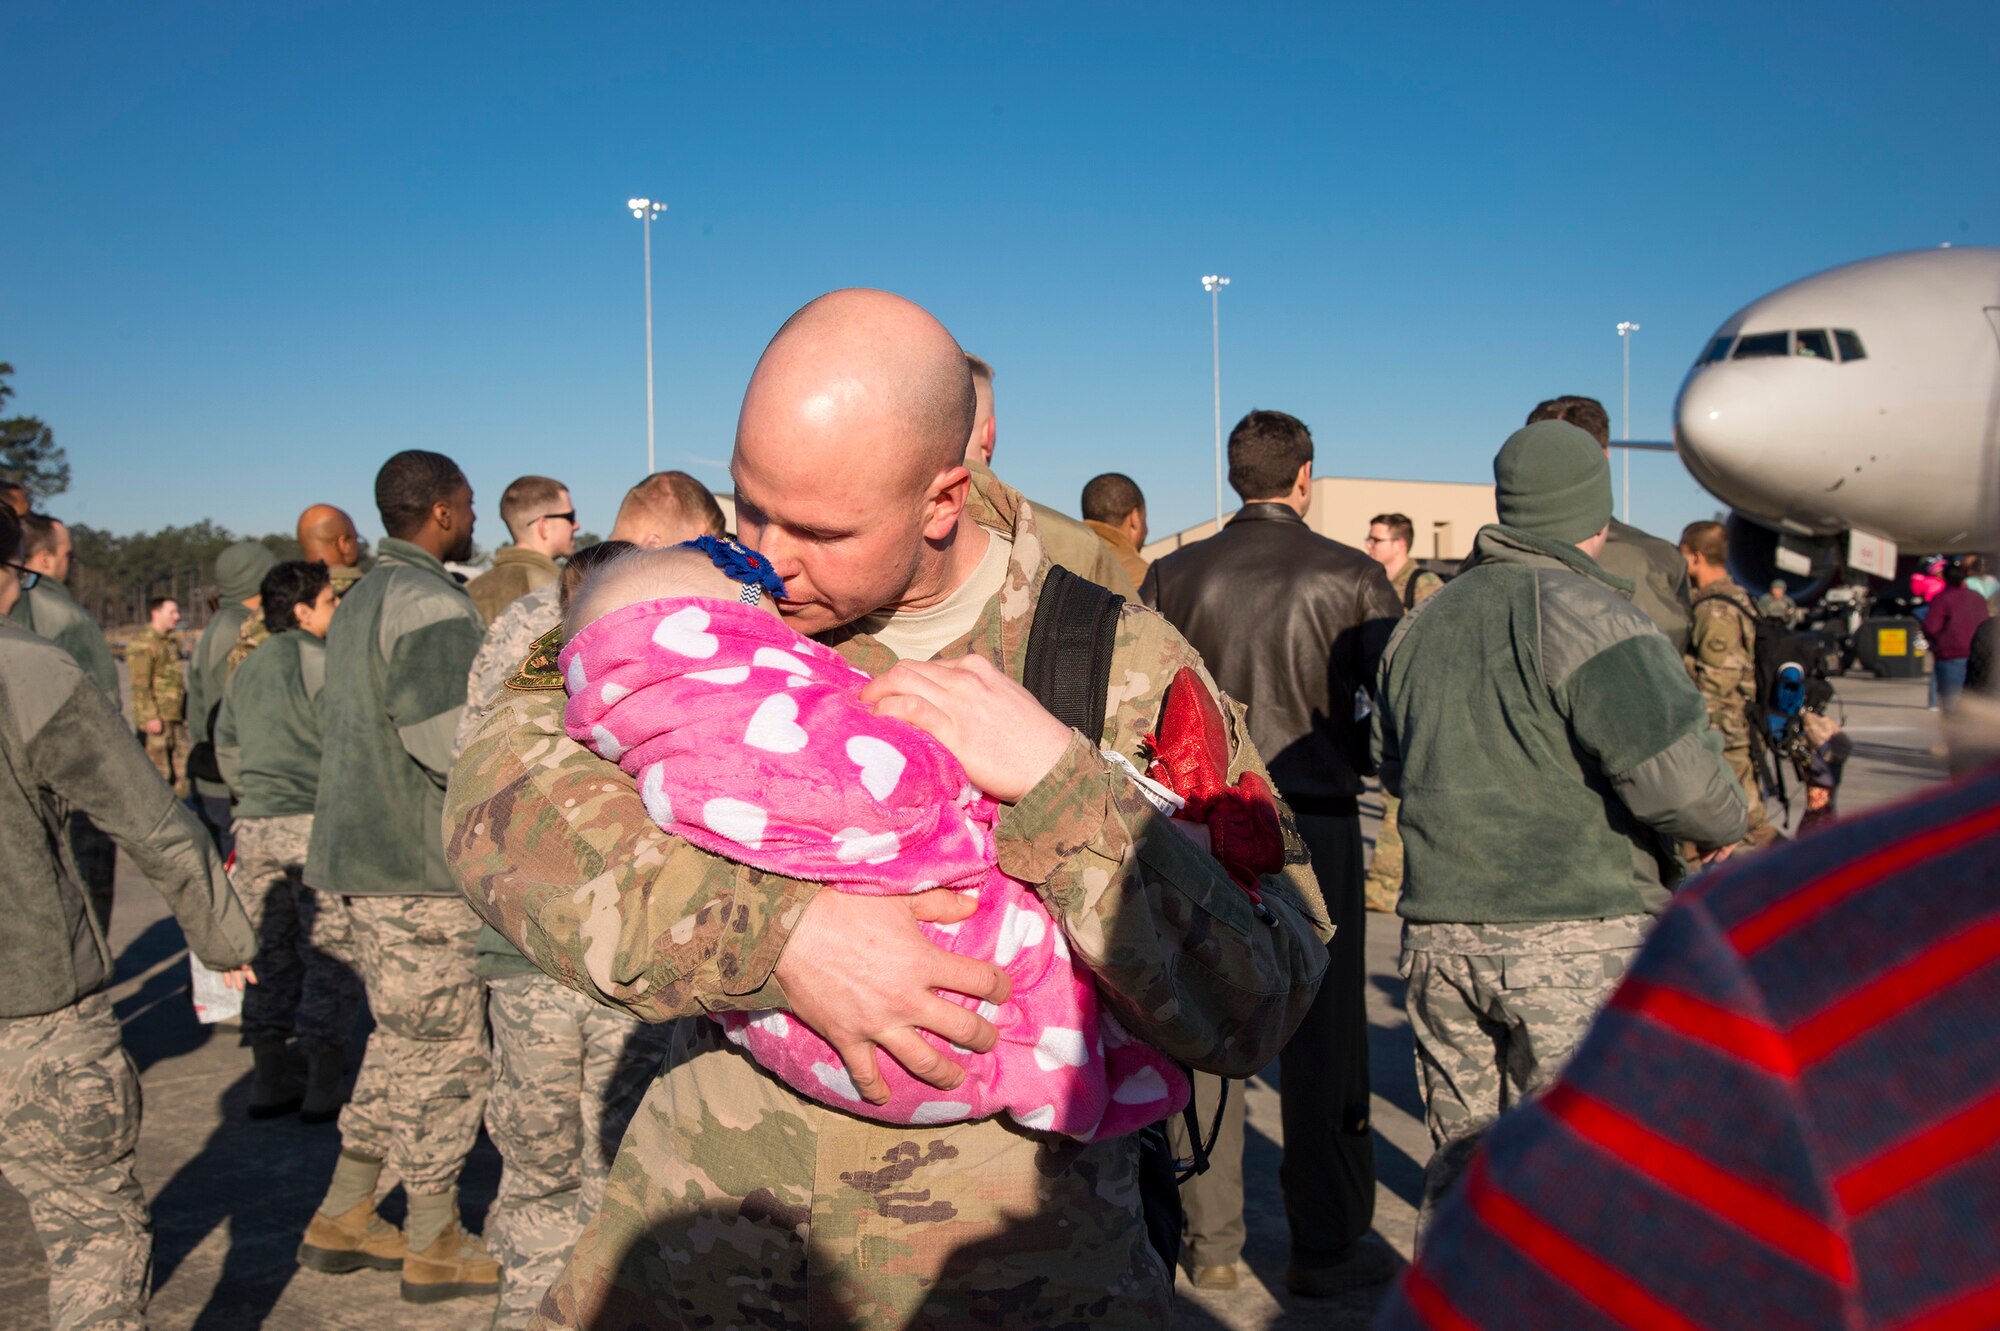 Tech. Sgt. Travis Van Haren, 74th Aircraft Maintenance Unit weapons expediter, kisses his baby during a redeployment ceremony, Jan. 19, 2018, at Moody Air Force Base, Ga. The 74th Fighter Squadron conducted around-the-clock planning and operations, which have decimated ISIS’ fighting capacity with precise strikes, erasing tens of thousands of fighters from ISIS rosters. (U.S. Air Force photo by Andrea Jenkins)